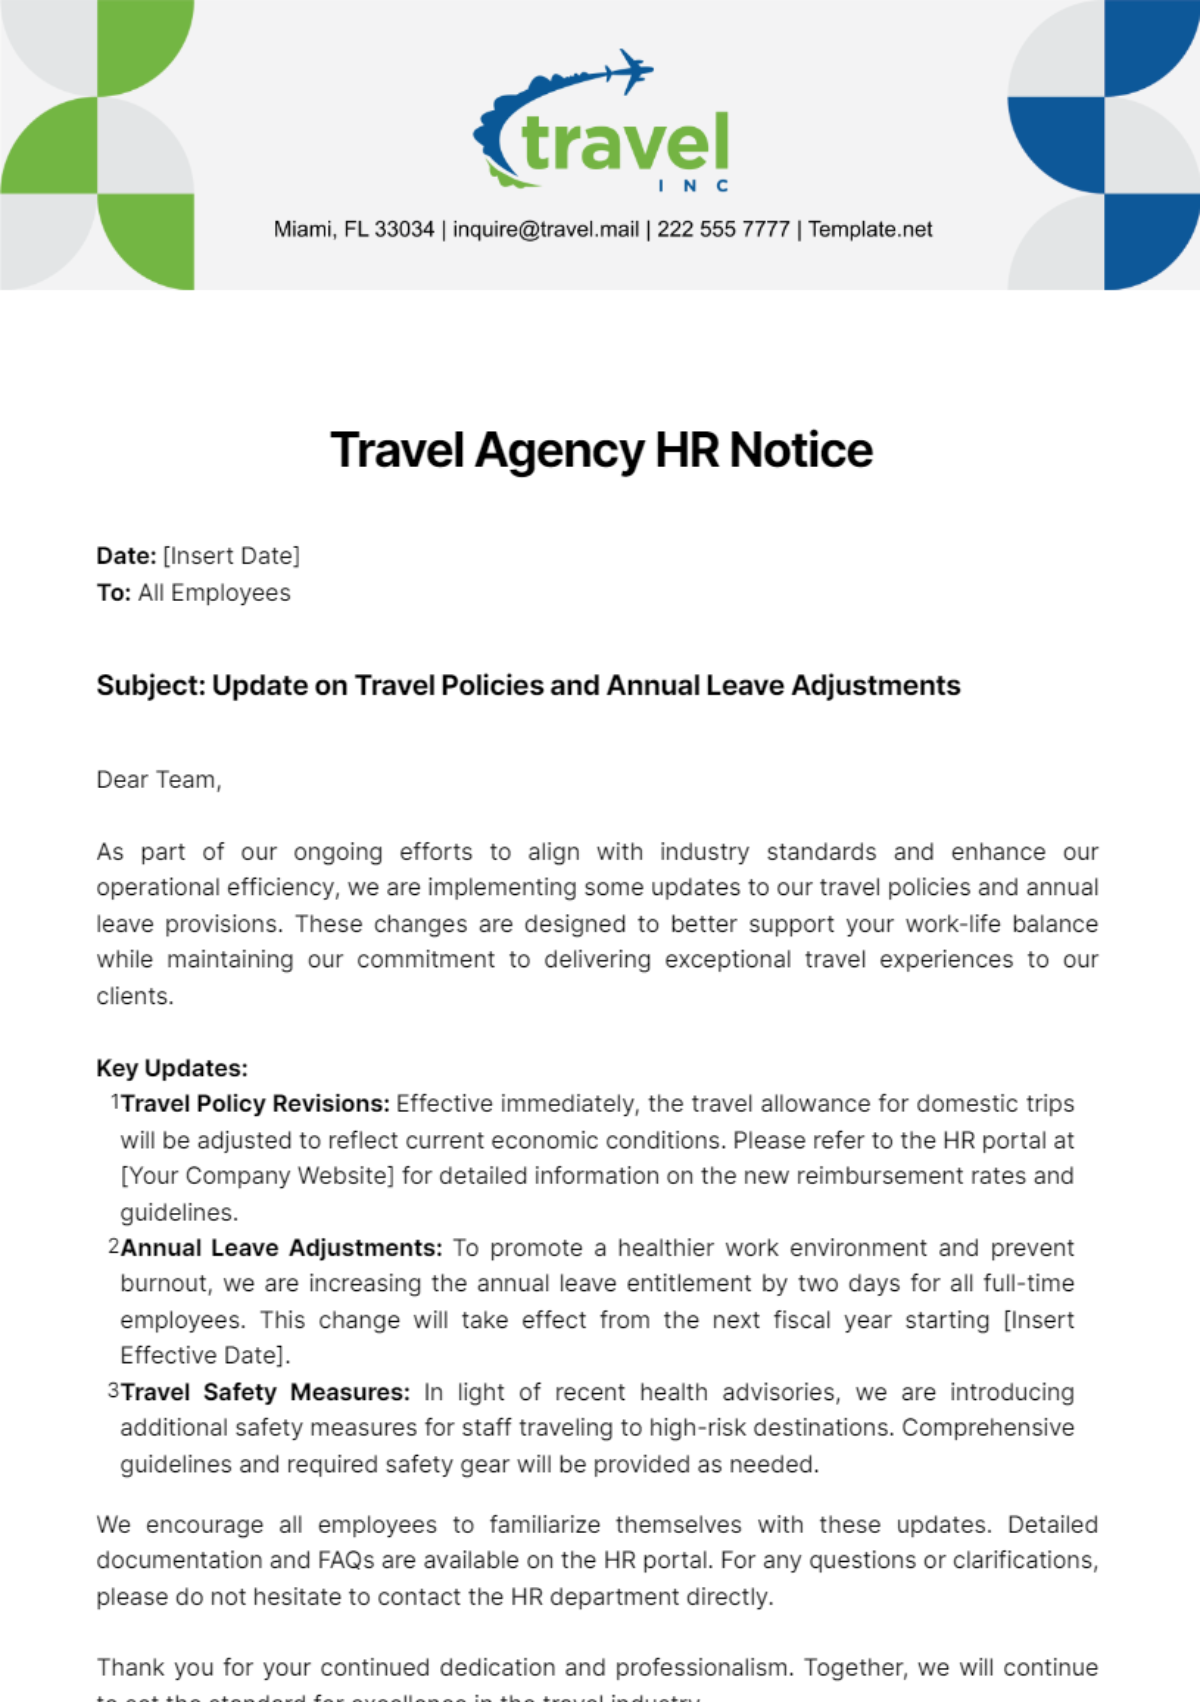 Travel Agency HR Notice Template